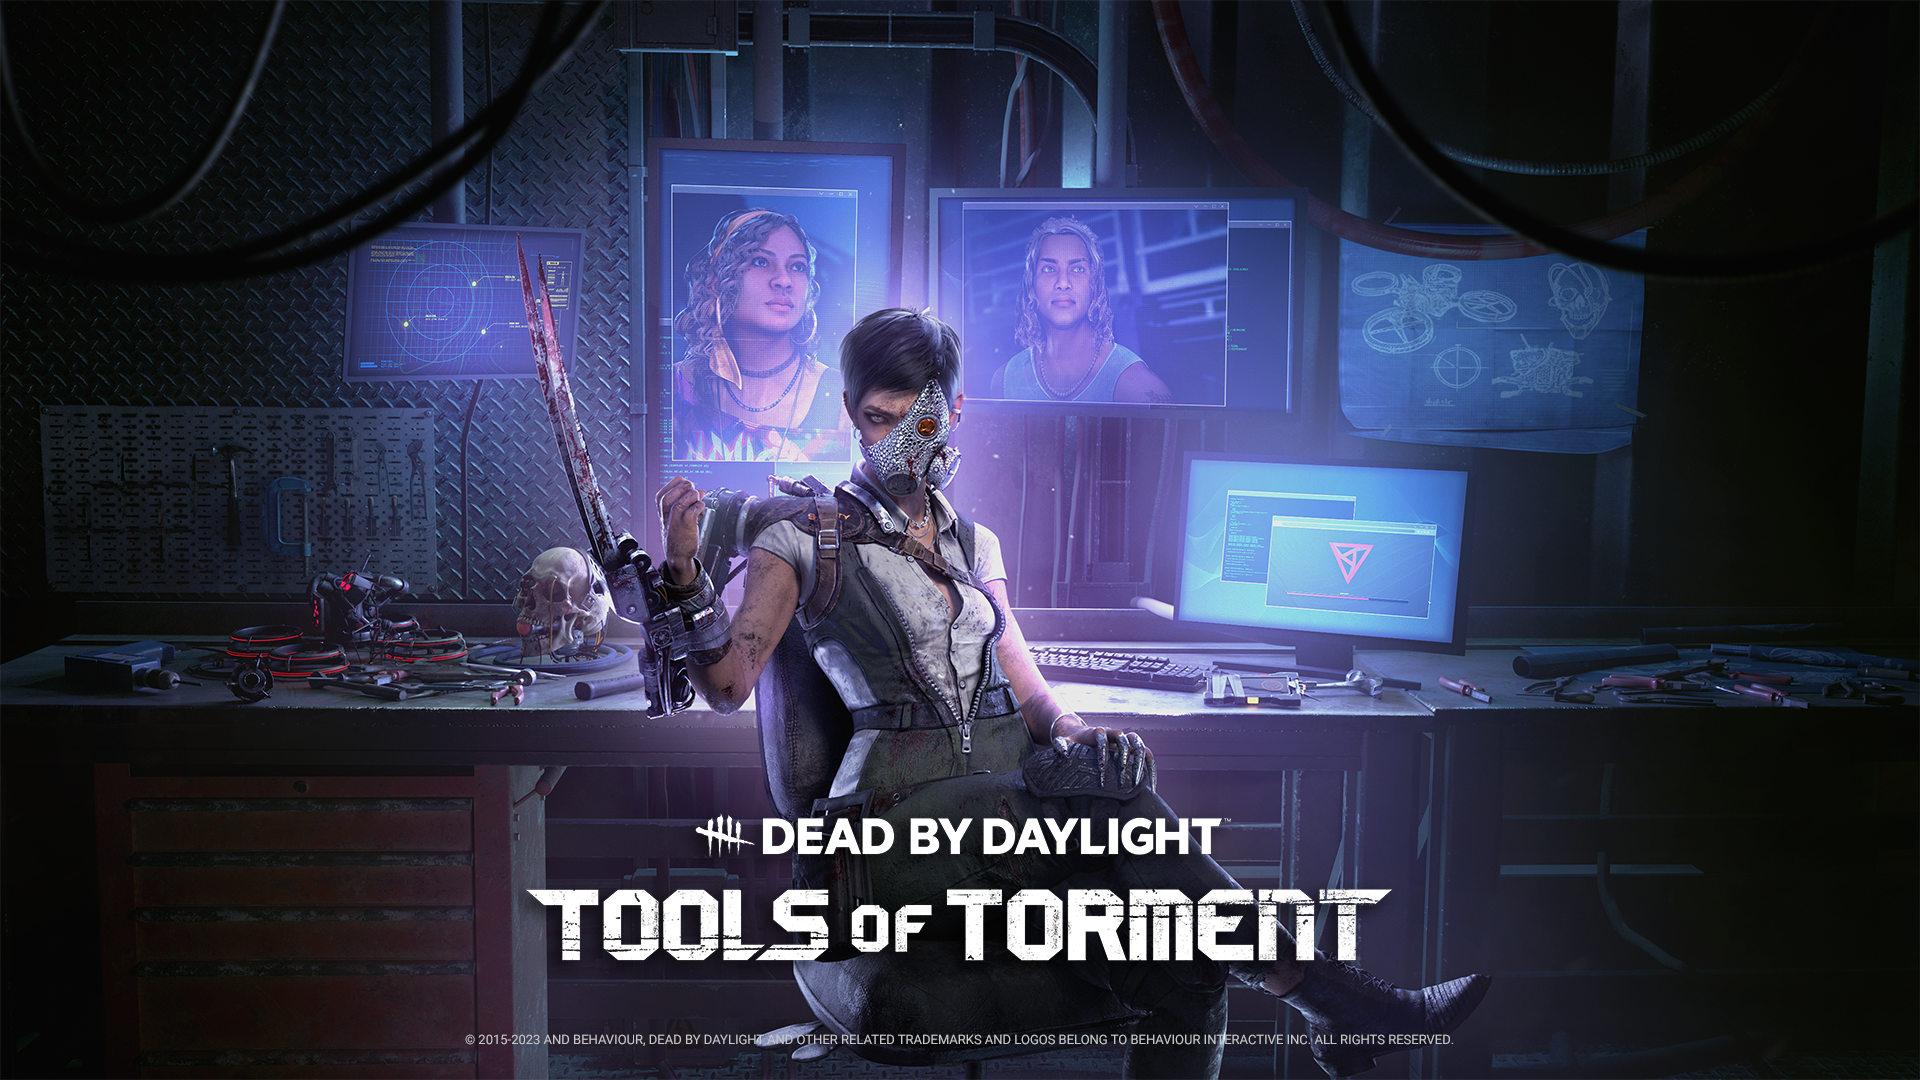 Dead by Daylight - key art for Chapter 27, Tools of Torment, showing the new Killer. She is a young woman with short dark hair, wearing a bedazzled mask over half her face. She wears sensible hunting clothes in grey and white, and sits in front of many computer screens showing her prey.